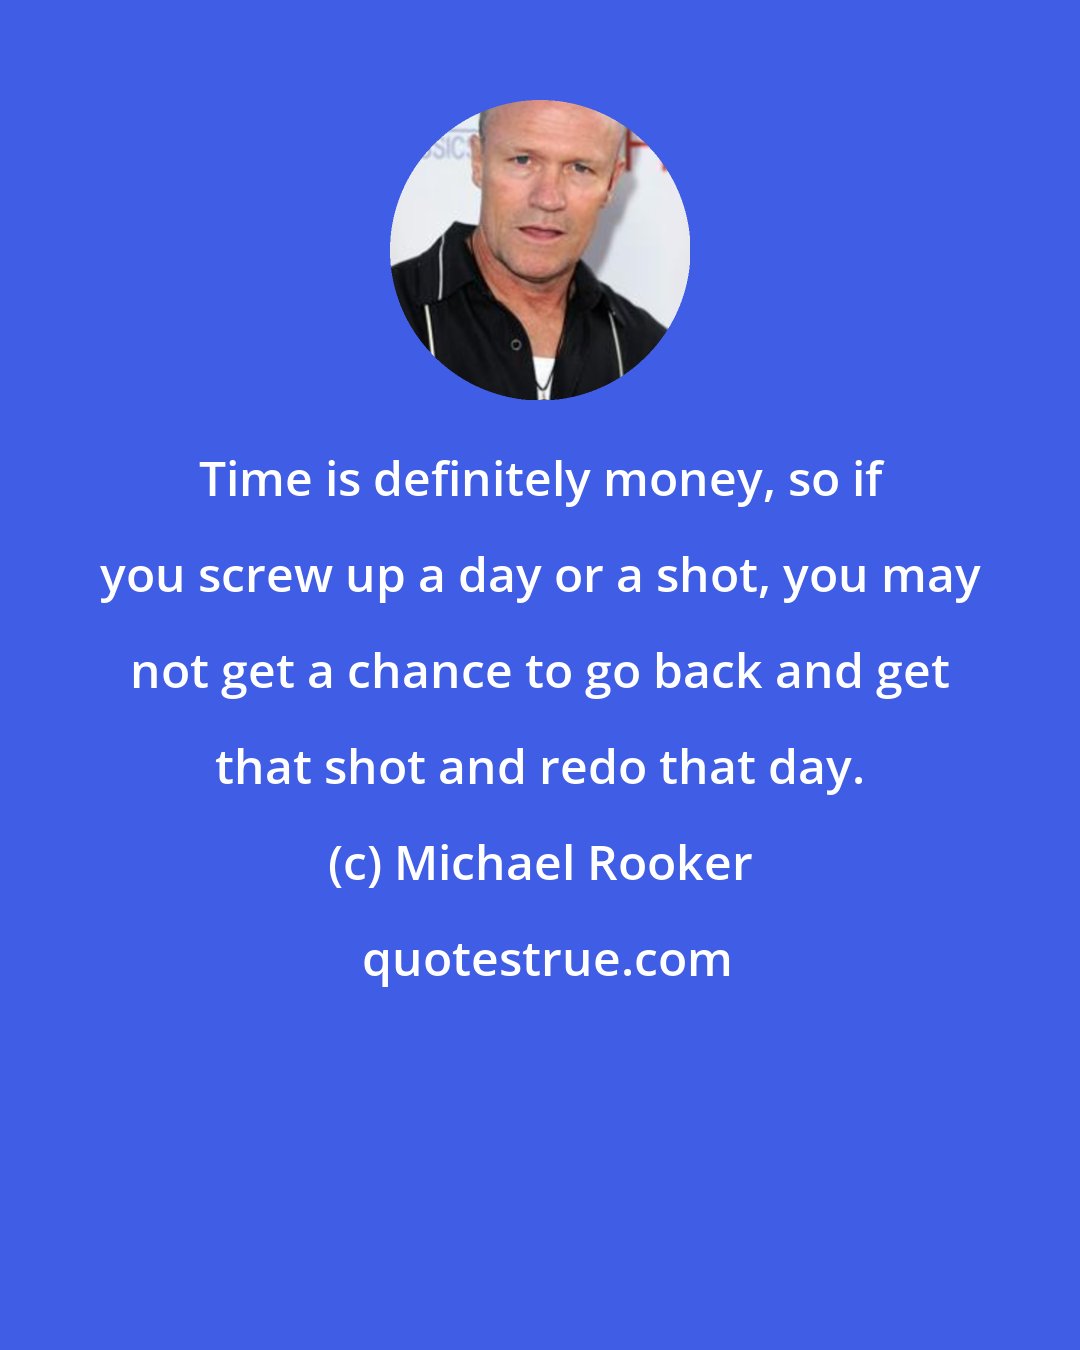 Michael Rooker: Time is definitely money, so if you screw up a day or a shot, you may not get a chance to go back and get that shot and redo that day.